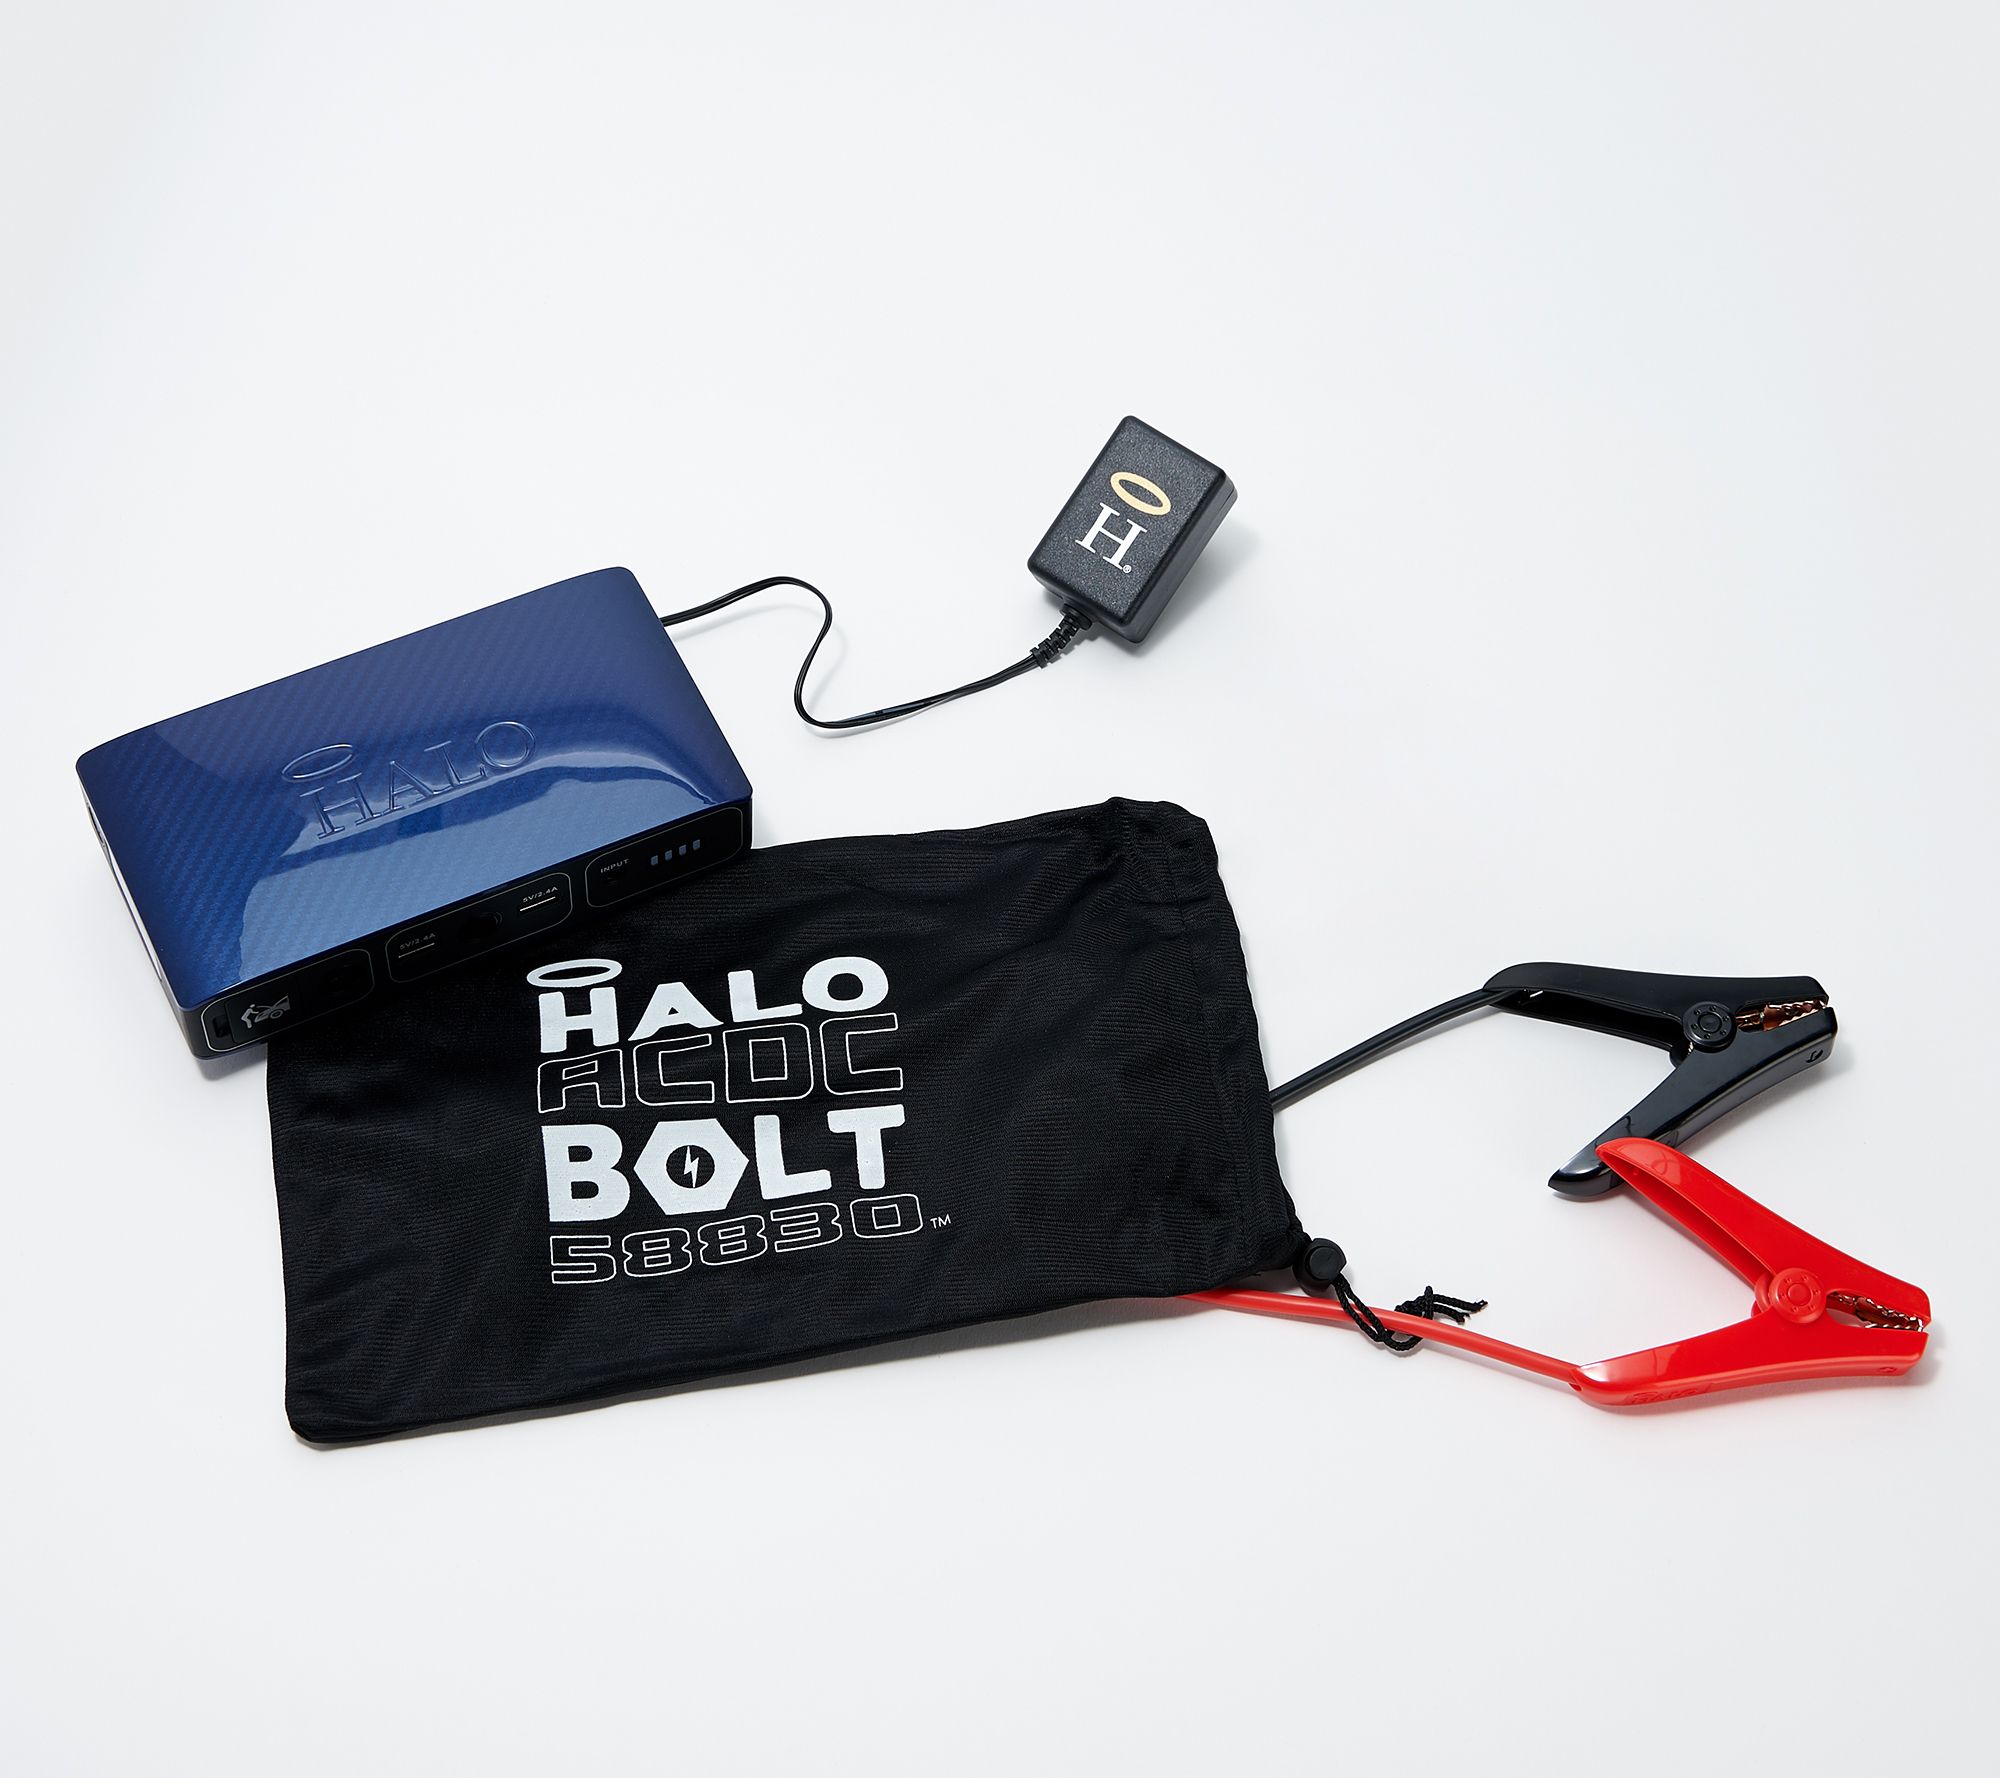 Bolt Power Portable Chargers Auto Car Battery Booster Jump Starter Jumper Cables